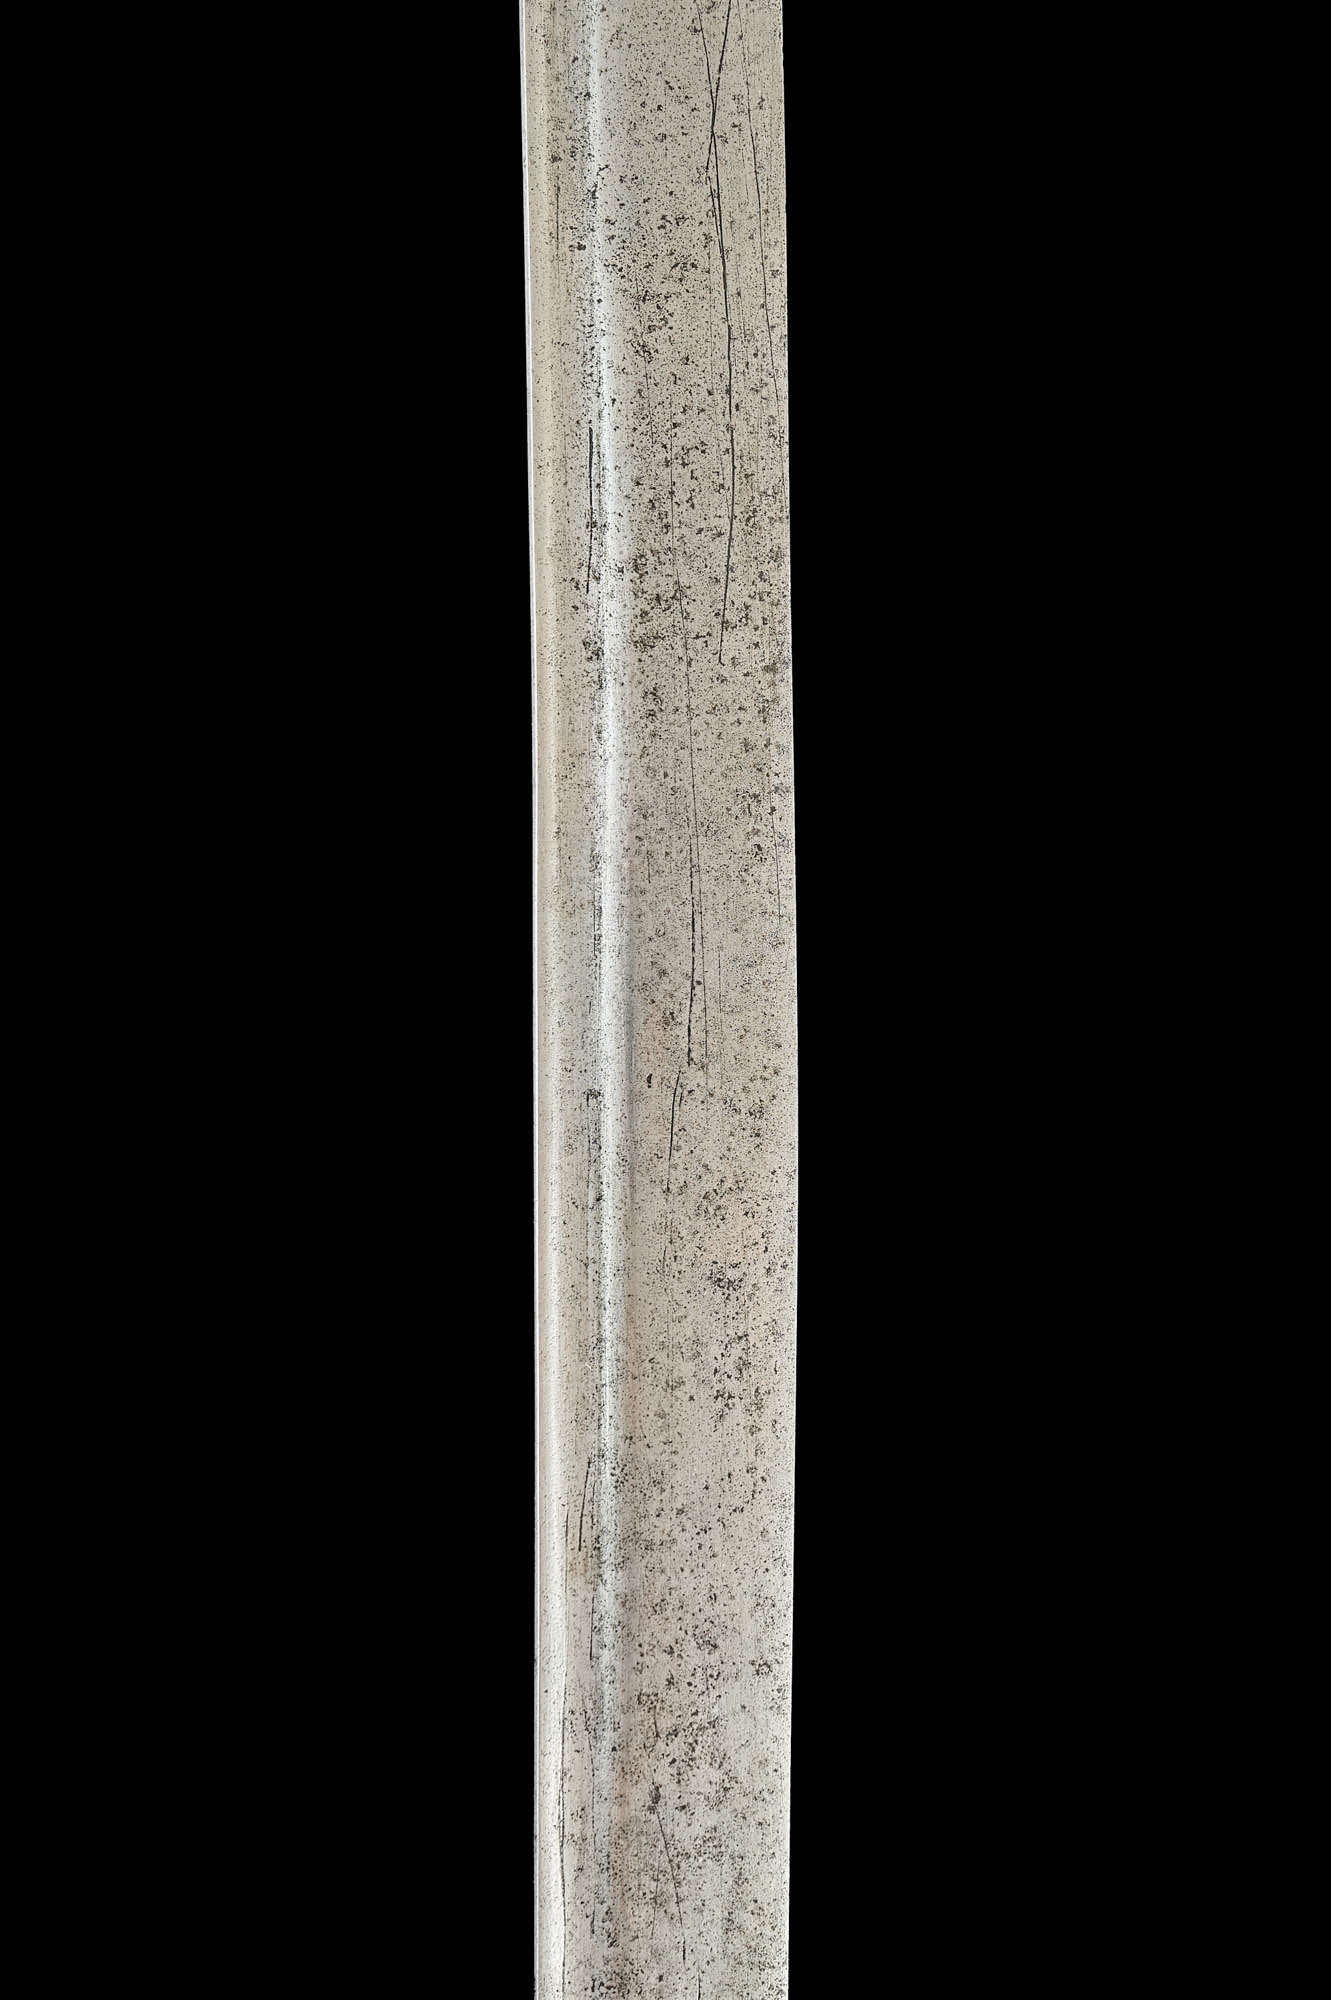 TATAR SABER SWORD DECORATED WITH RHOMBS - Image 15 of 21